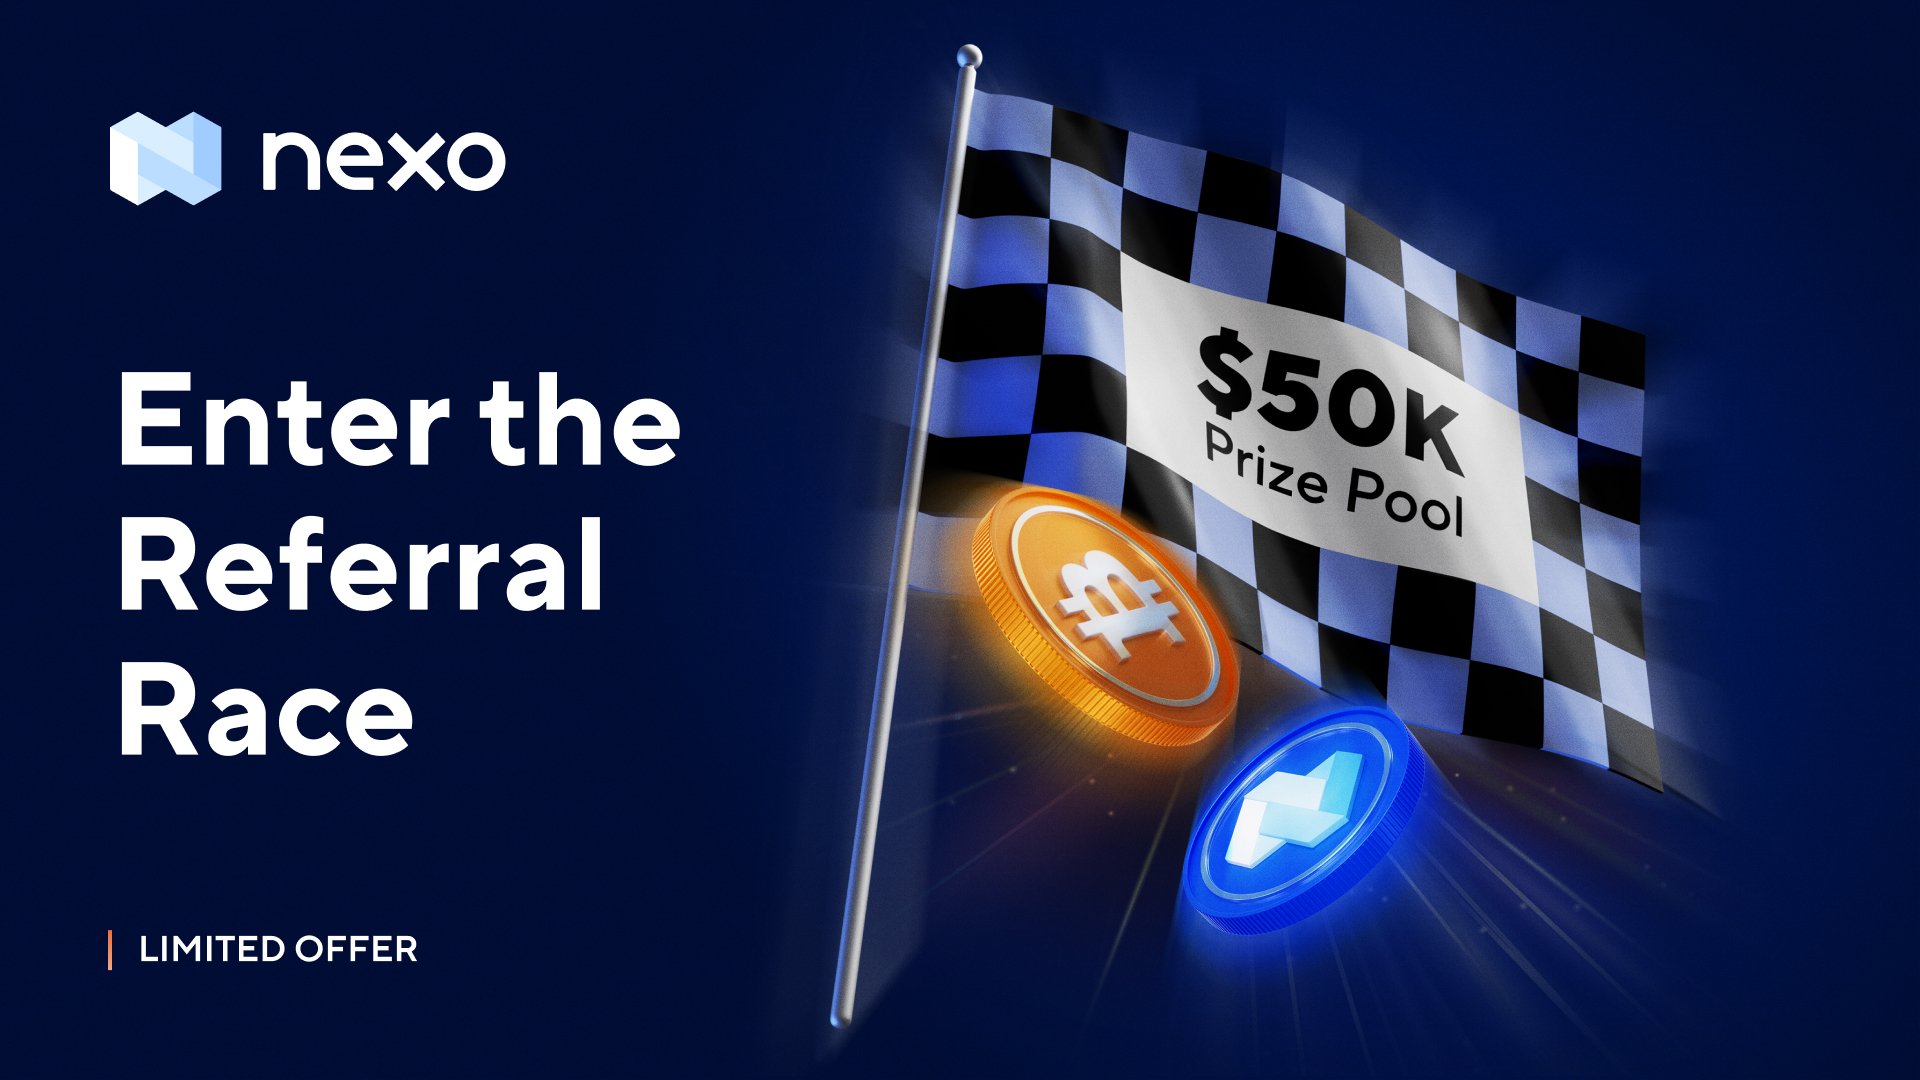 Enter Our Referral Race with a $50,000 Prize Pool